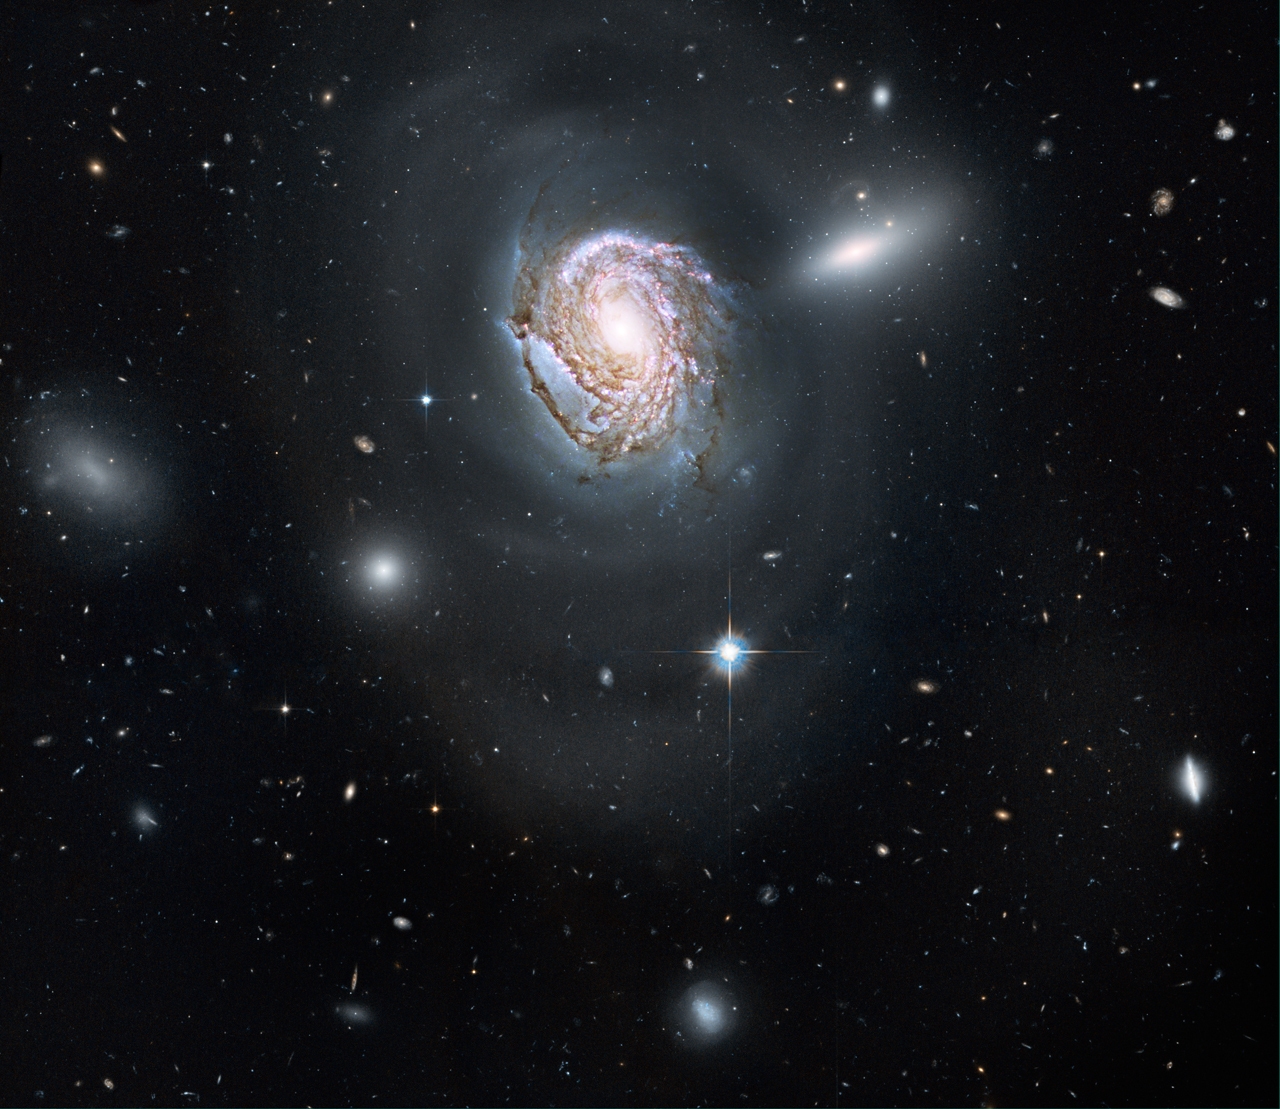 Hubble Sees 'Island Universe' in the Coma Cluster